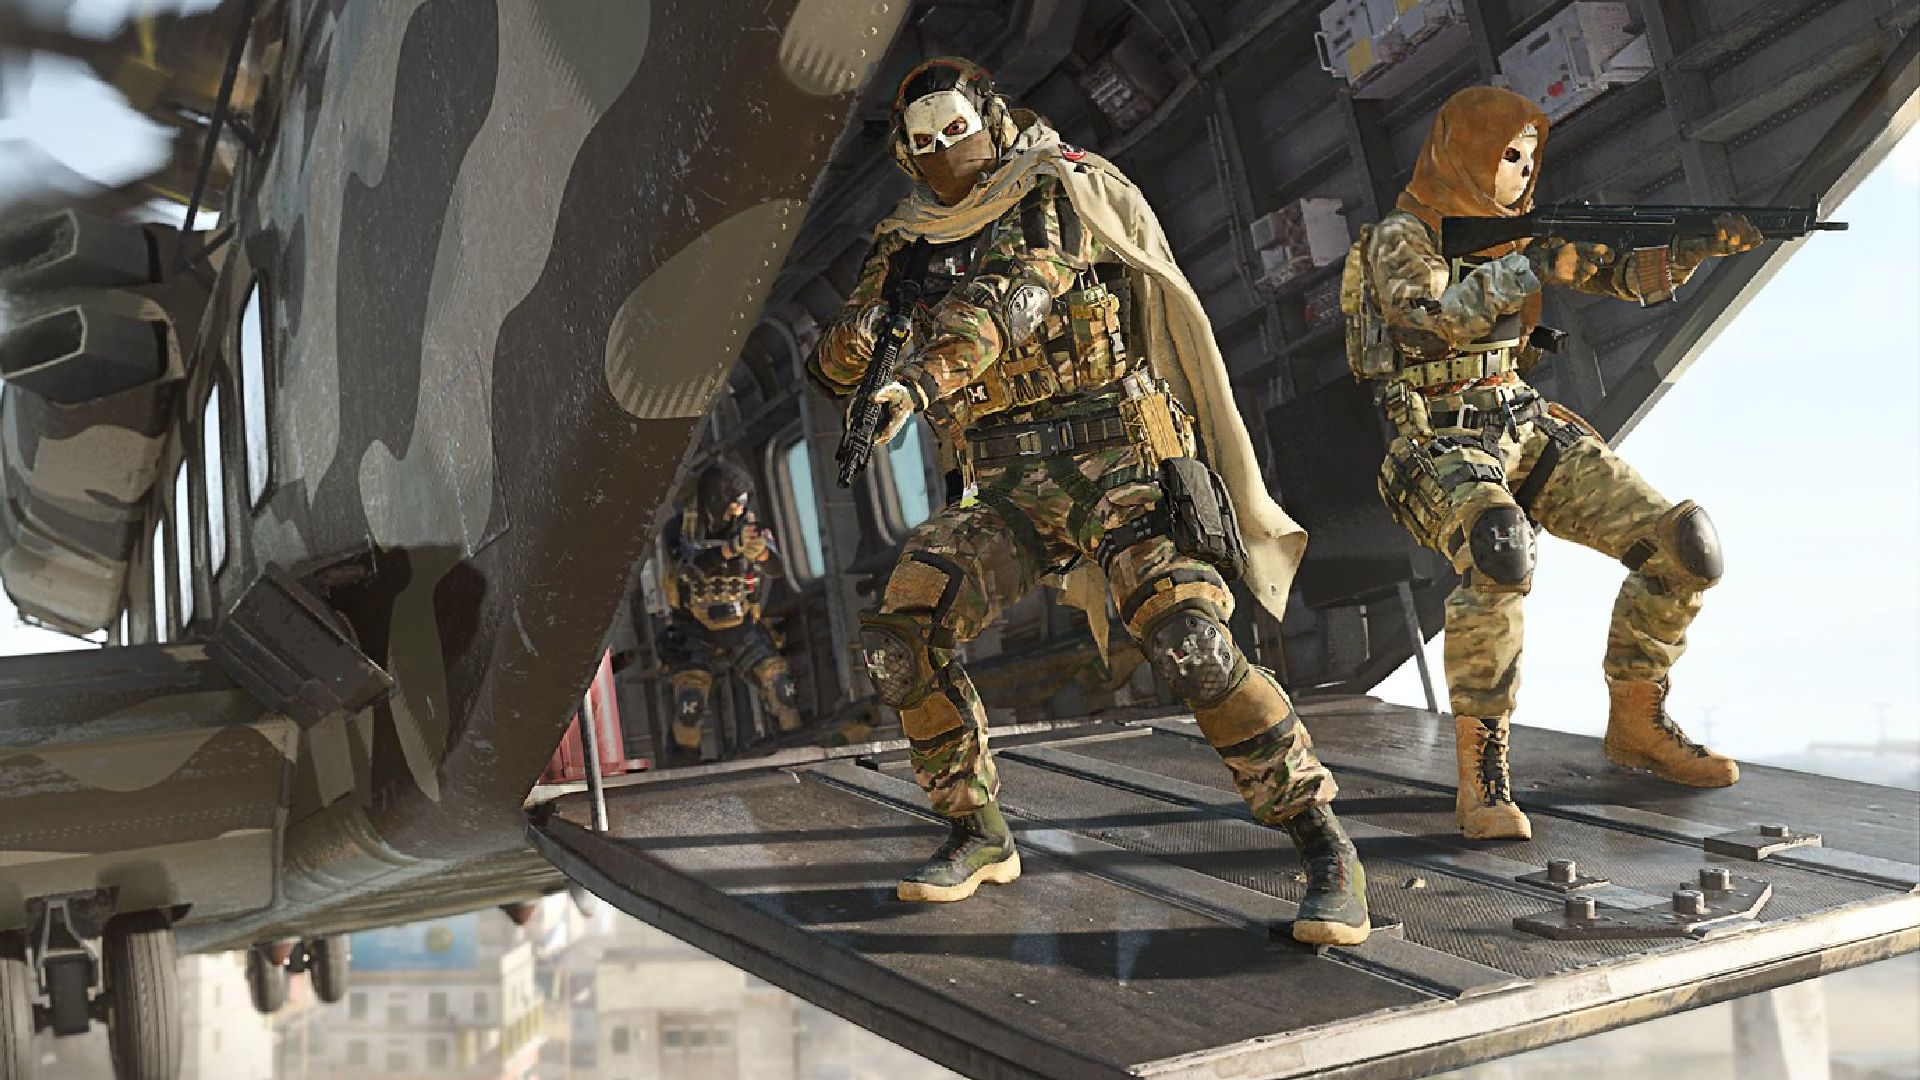 What are Raids in Modern Warfare 2? How to play, release date, and more